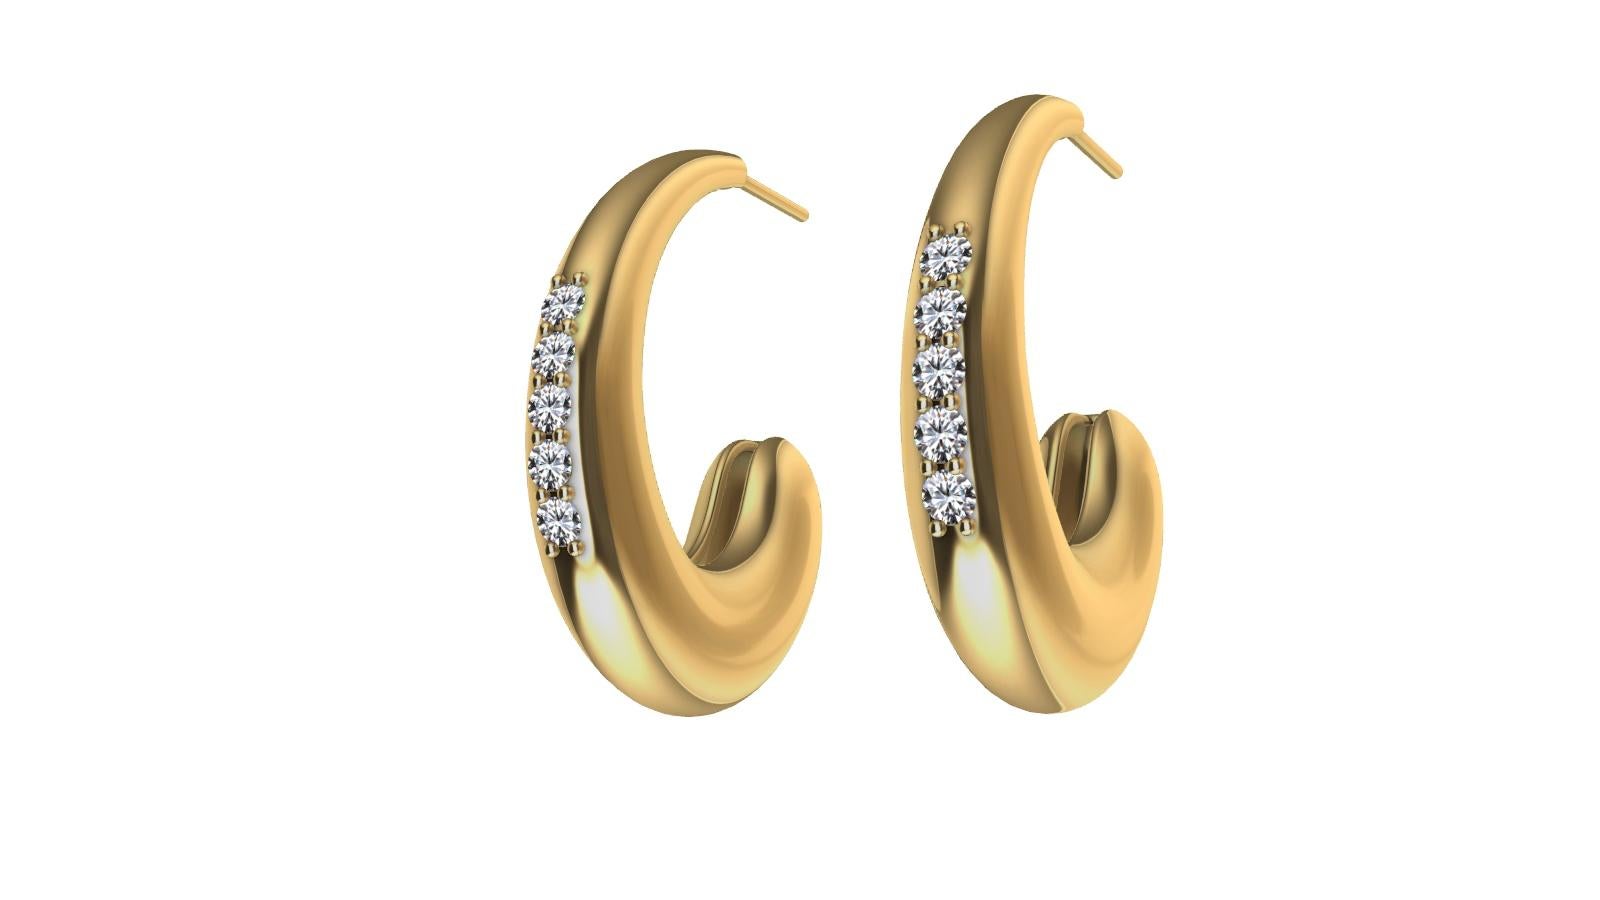 18 Karat Yellow Gold Diamond Petite Hoop Teardrop Earrings, Keep it simple silly. KISS. Or less is more. This design can last you 20 years or more. Designing for Tiffanys taught me the essence of the subblime. 
These are hollow hoops 3d printed